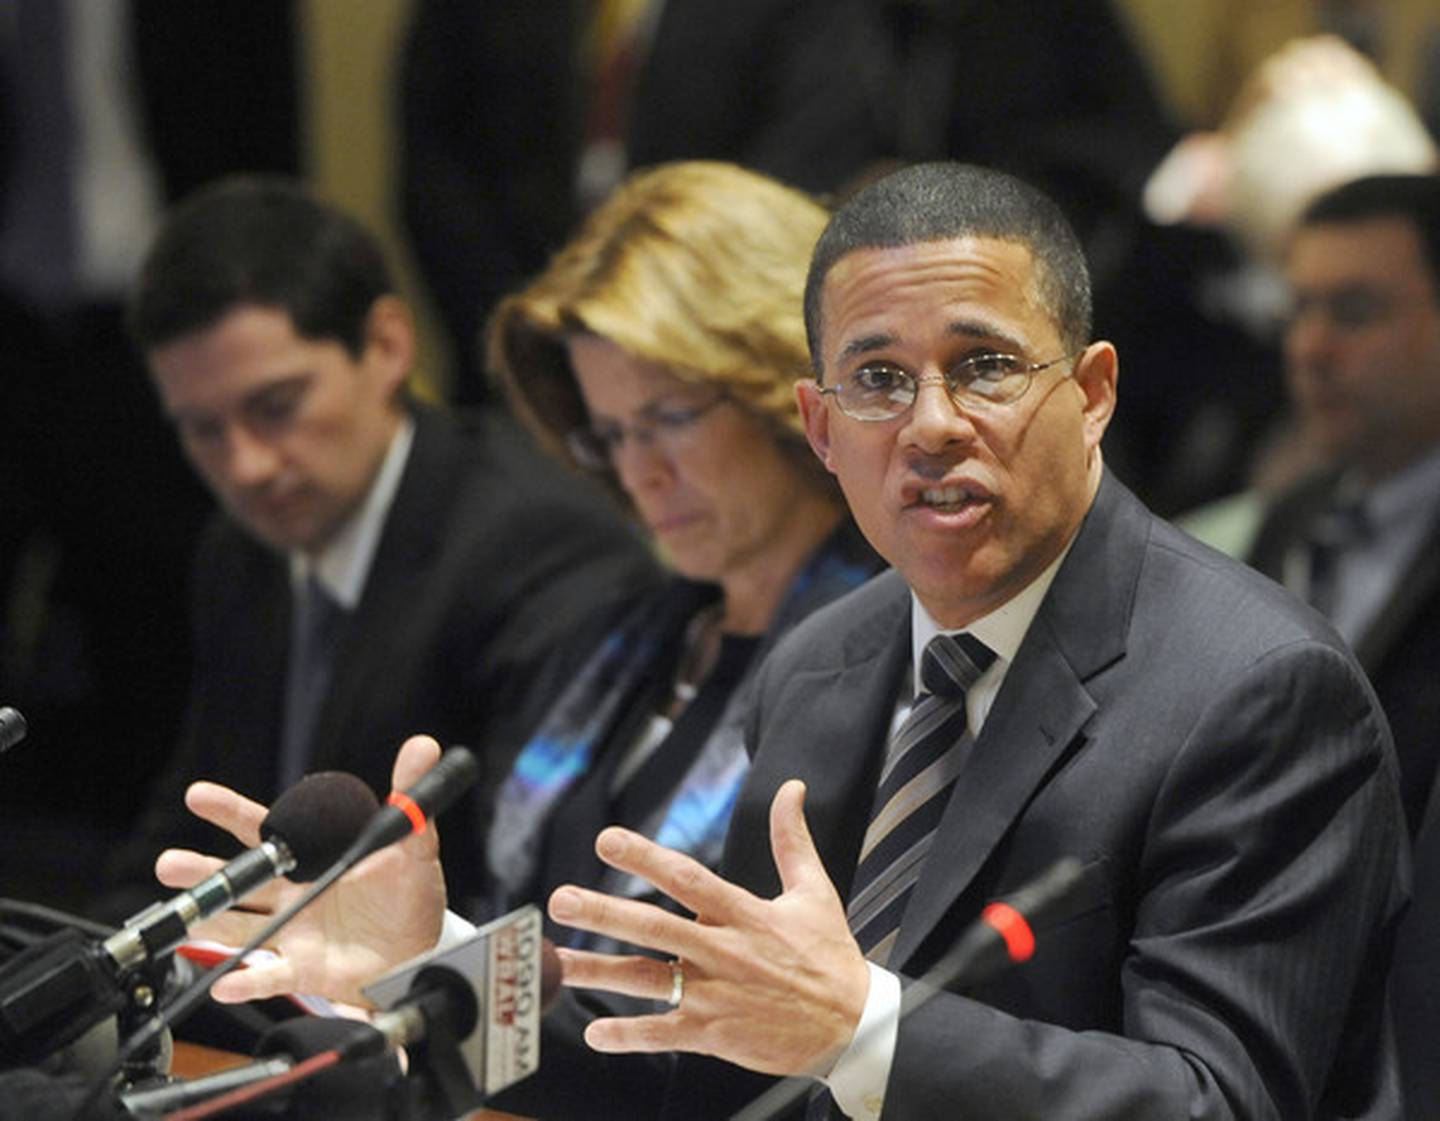 Then-Lt. Gov. Anthony Brown testified before the House Health and Government Committee about Maryland's health exchange.